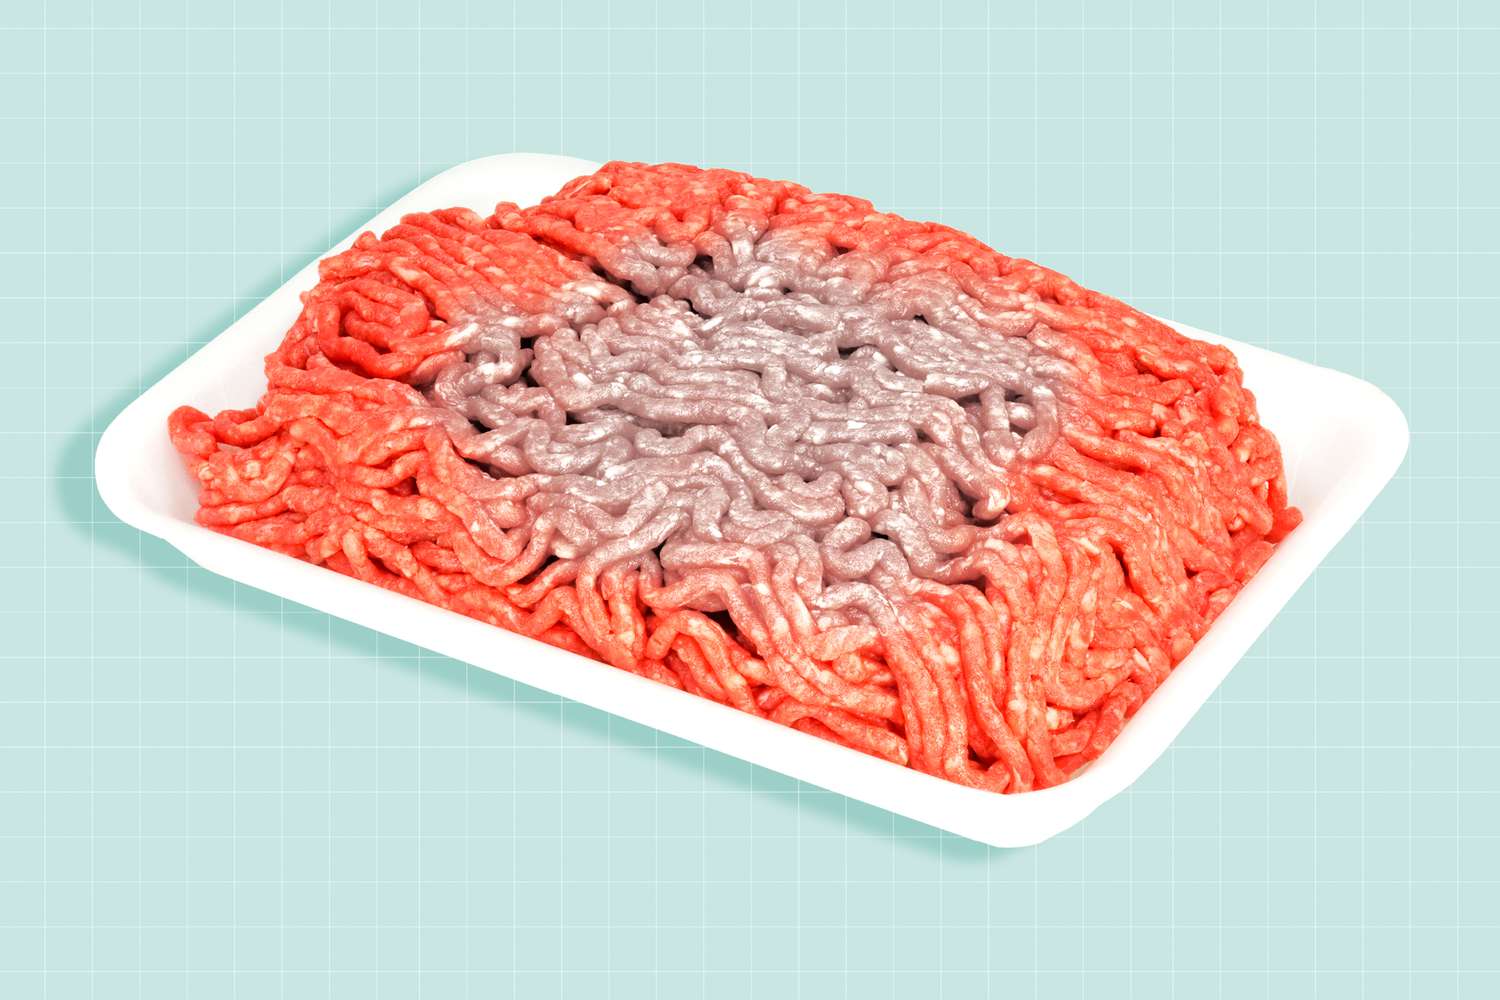 Can I Eat Ground Beef While Pregnant? 